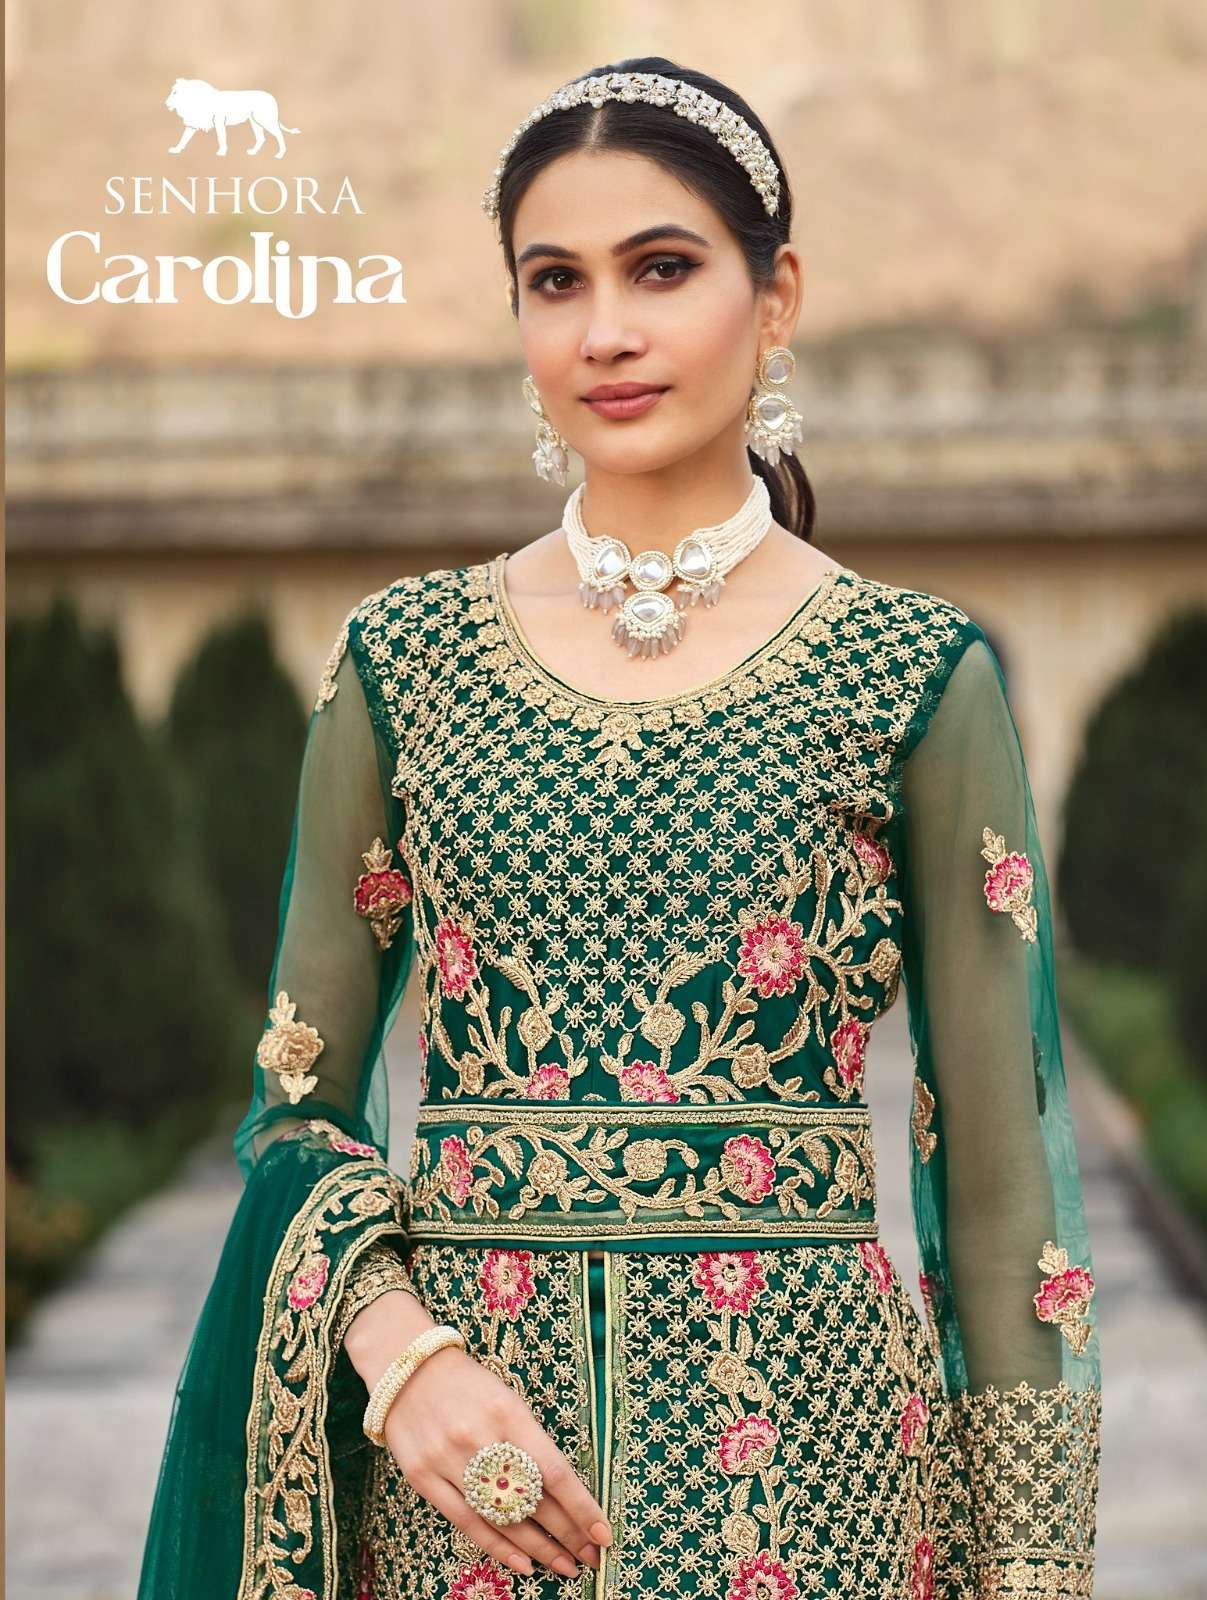 Carolina By Senhora Dresses 2075-A To 2075-D Series Beautiful Anarkali Suits Colorful Stylish Fancy Casual Wear & Ethnic Wear Pure Net Dresses At Wholesale Price